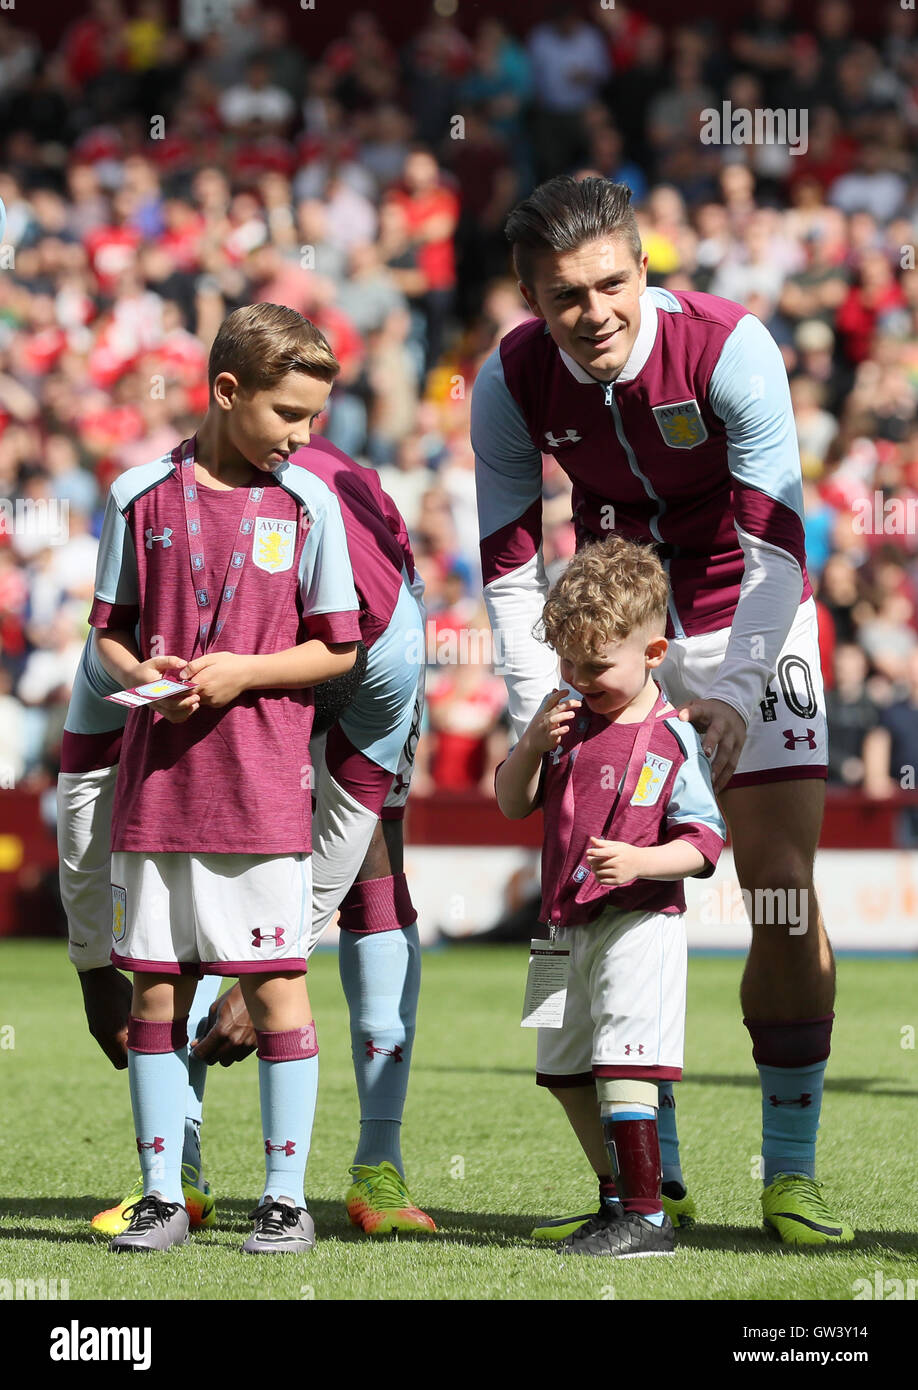 Aston Villa's Jack Grealish lines-up with mascot Carter Carrington during the Sky Bet Championship match at Villa Park, Birmingham. PRESS ASSOCIATION Photo. Picture date: Sunday September 11, 2016. See PA story soccer Villa. Photo credit should read: Martin Rickett/PA Wire. RESTRICTIONS: Editorial use only. Maximum 45 images during a match. No video emulation or promotion as 'live'. No use in games, competitions, merchandise, betting or single club/player services. No use with unofficial audio, video, data, fixtures or club/league logos. Stock Photo